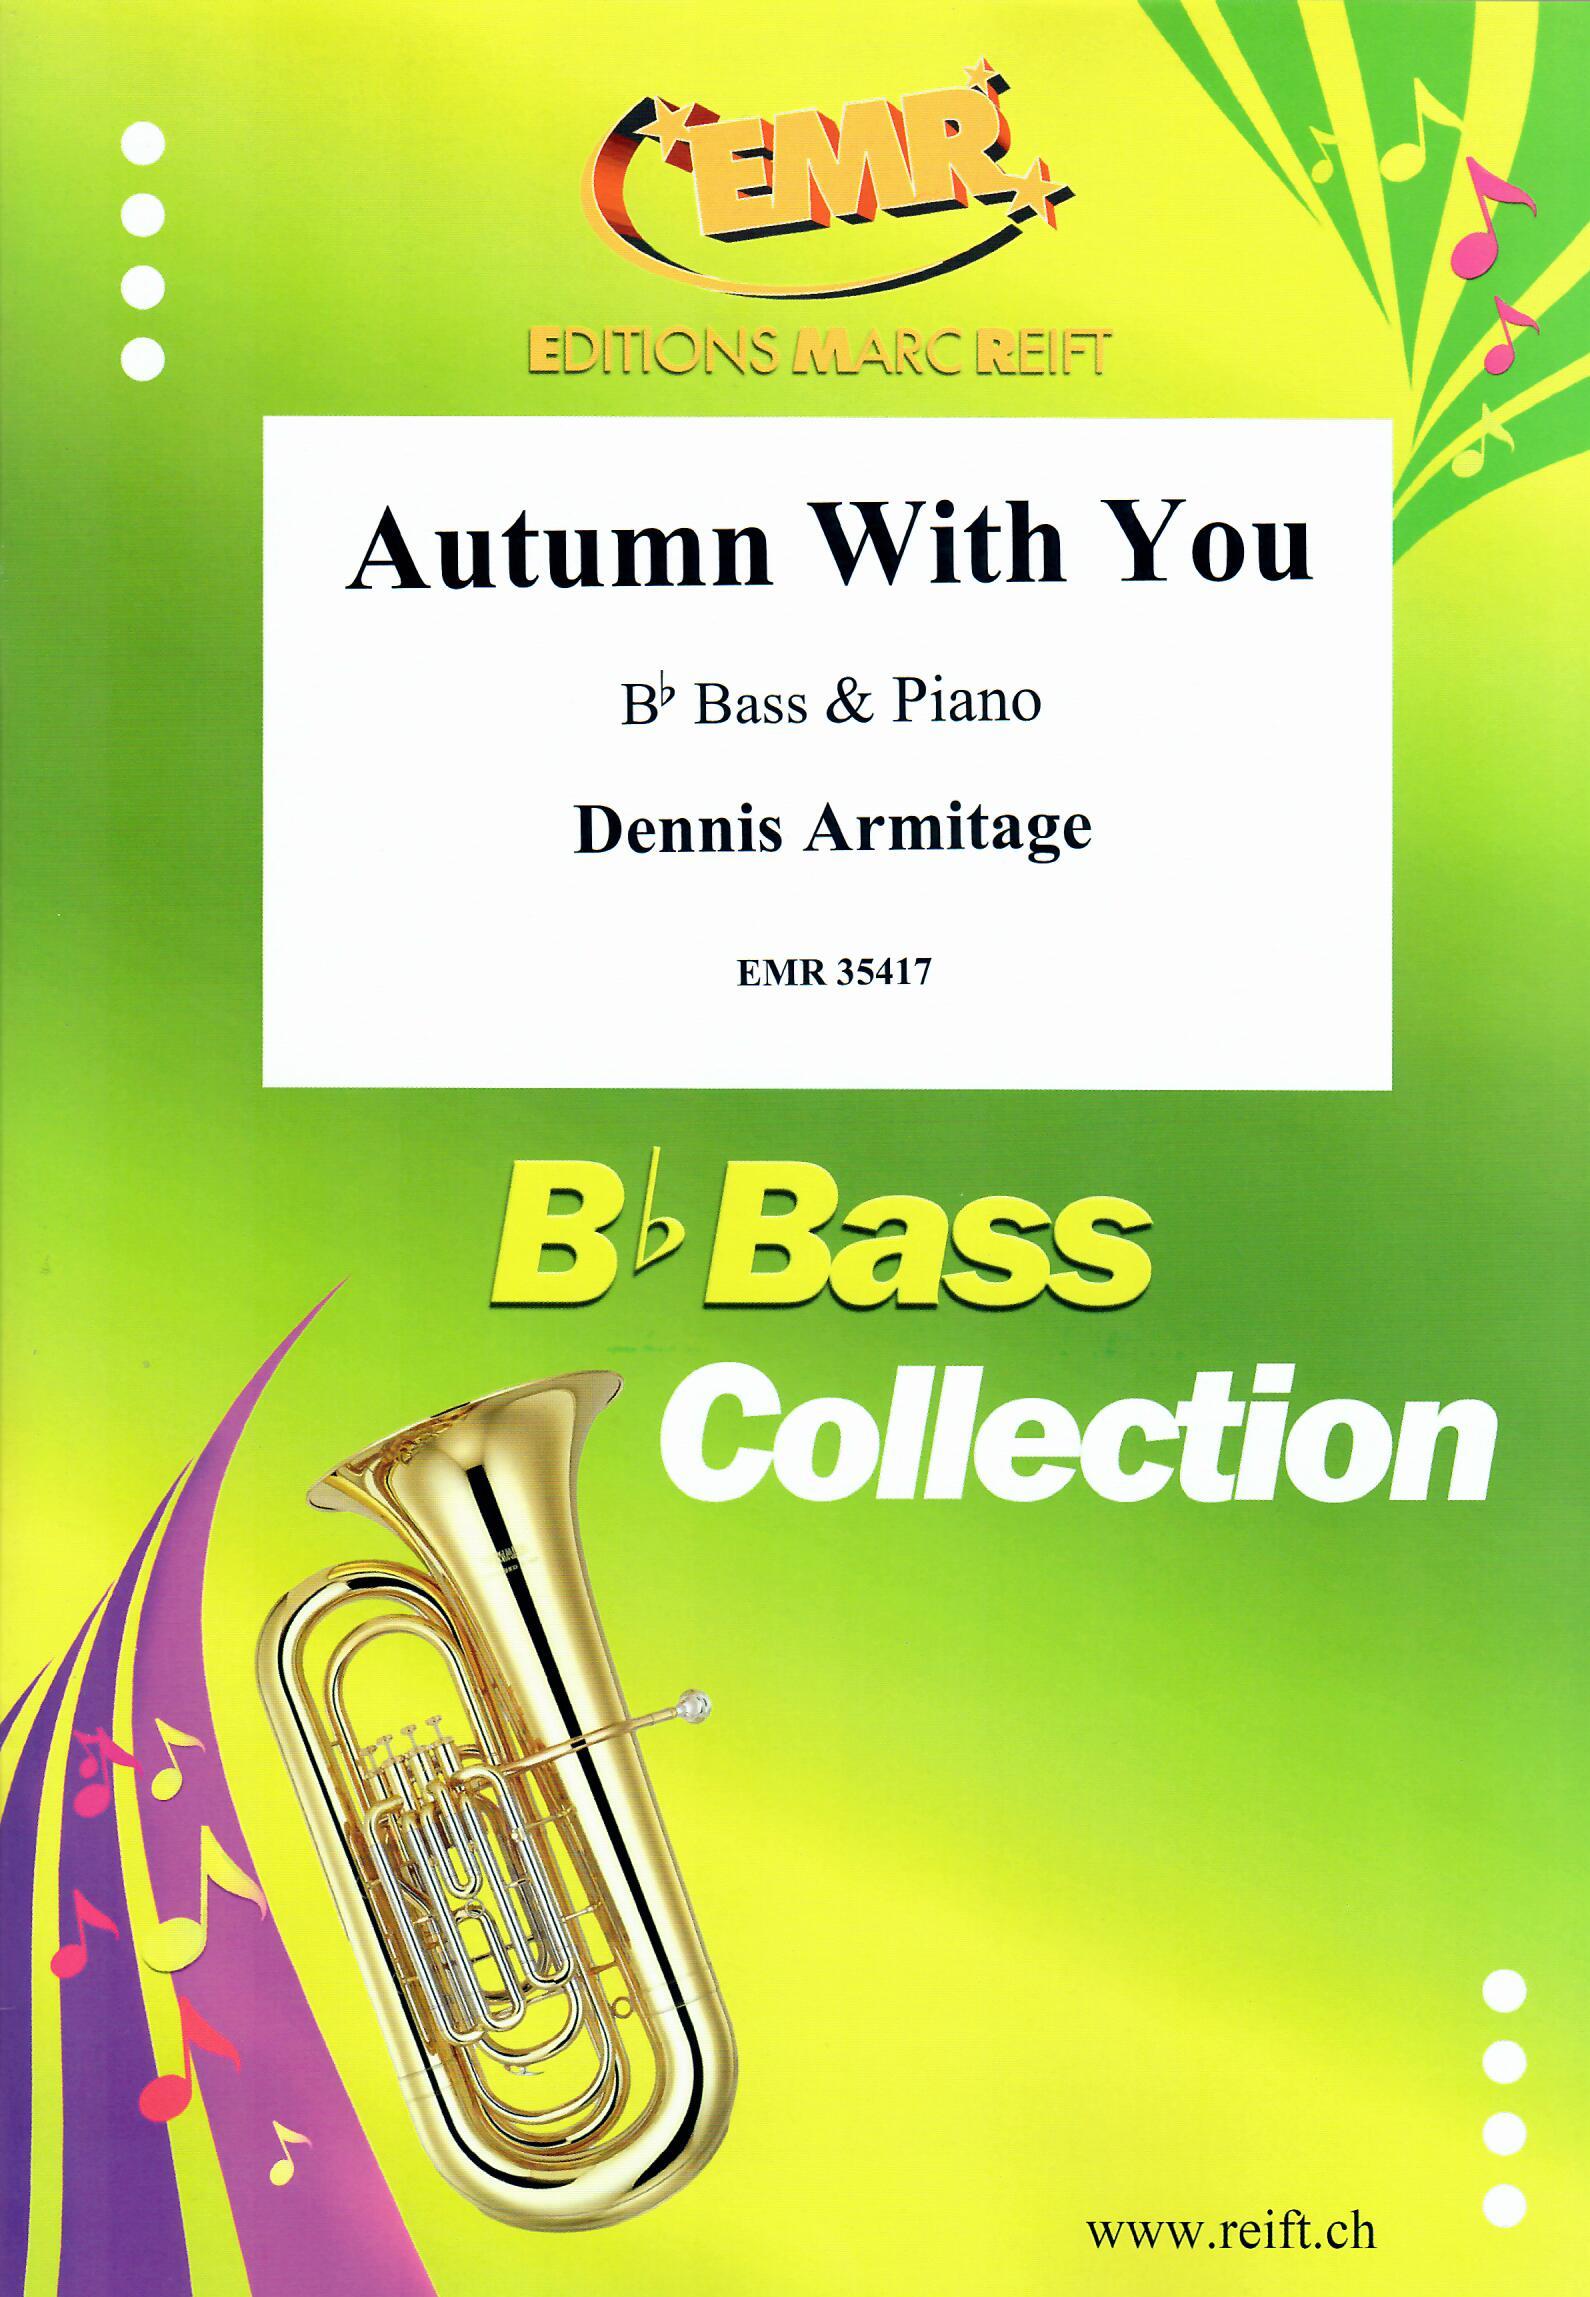 AUTUMN WITH YOU, SOLOS - E♭. Bass